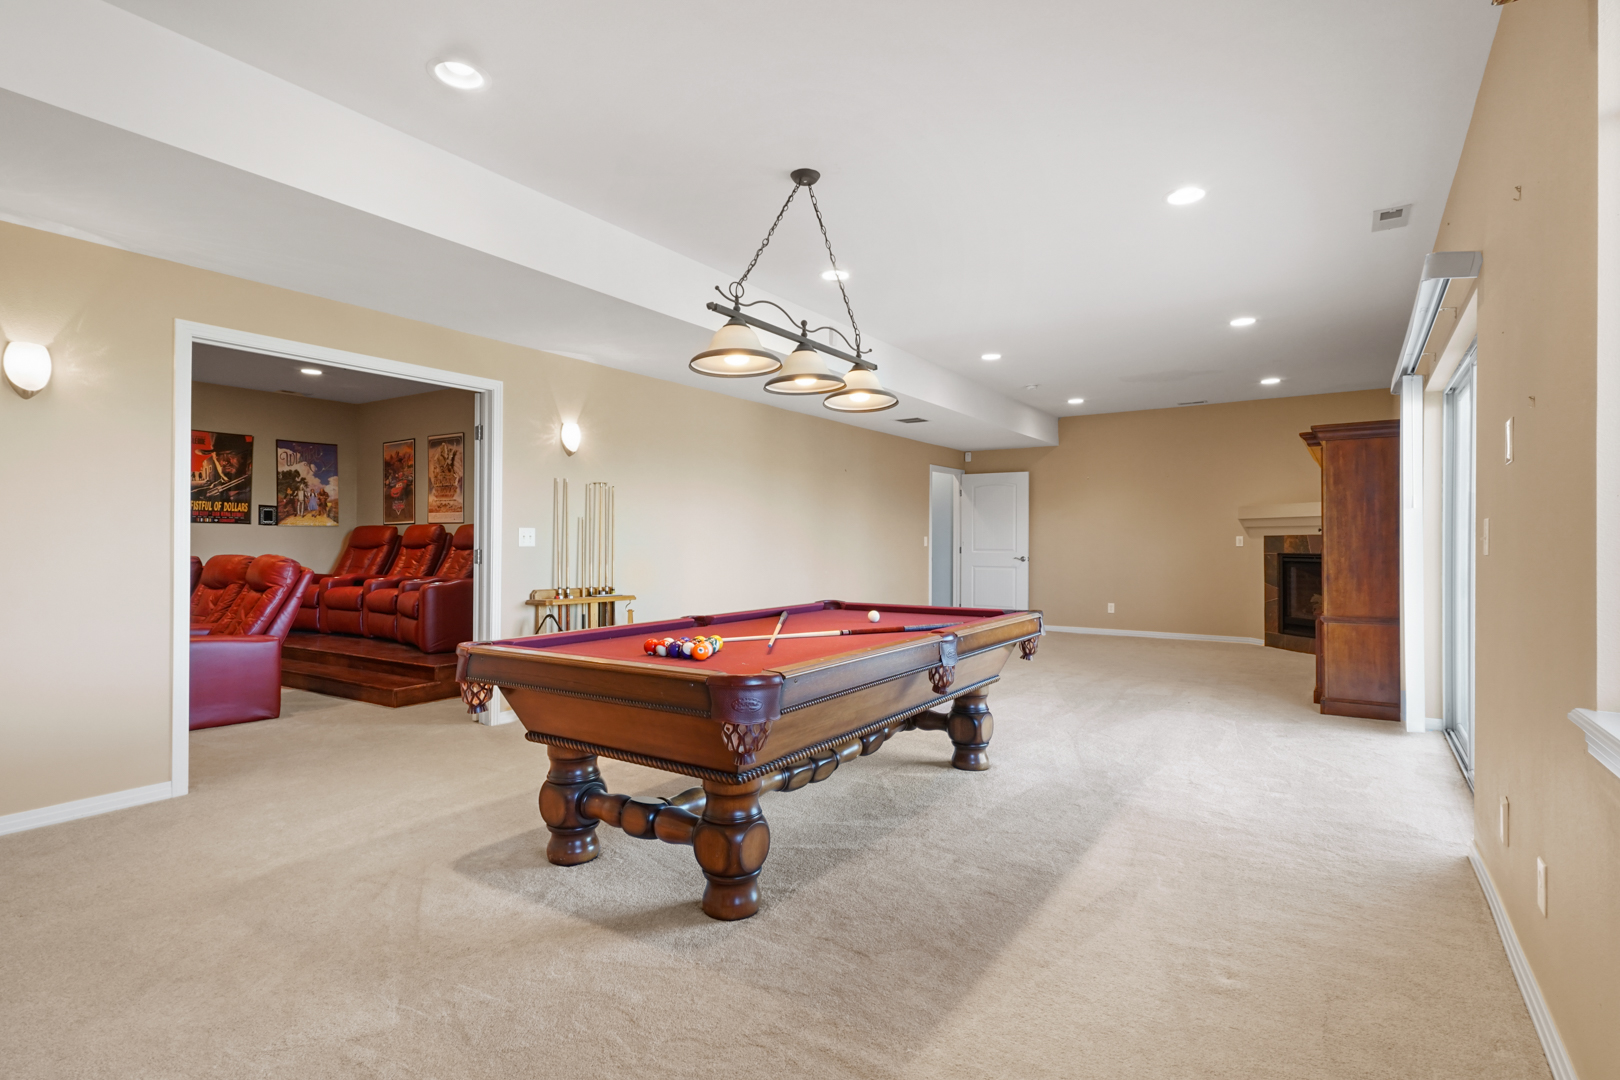 Pool Table is Included